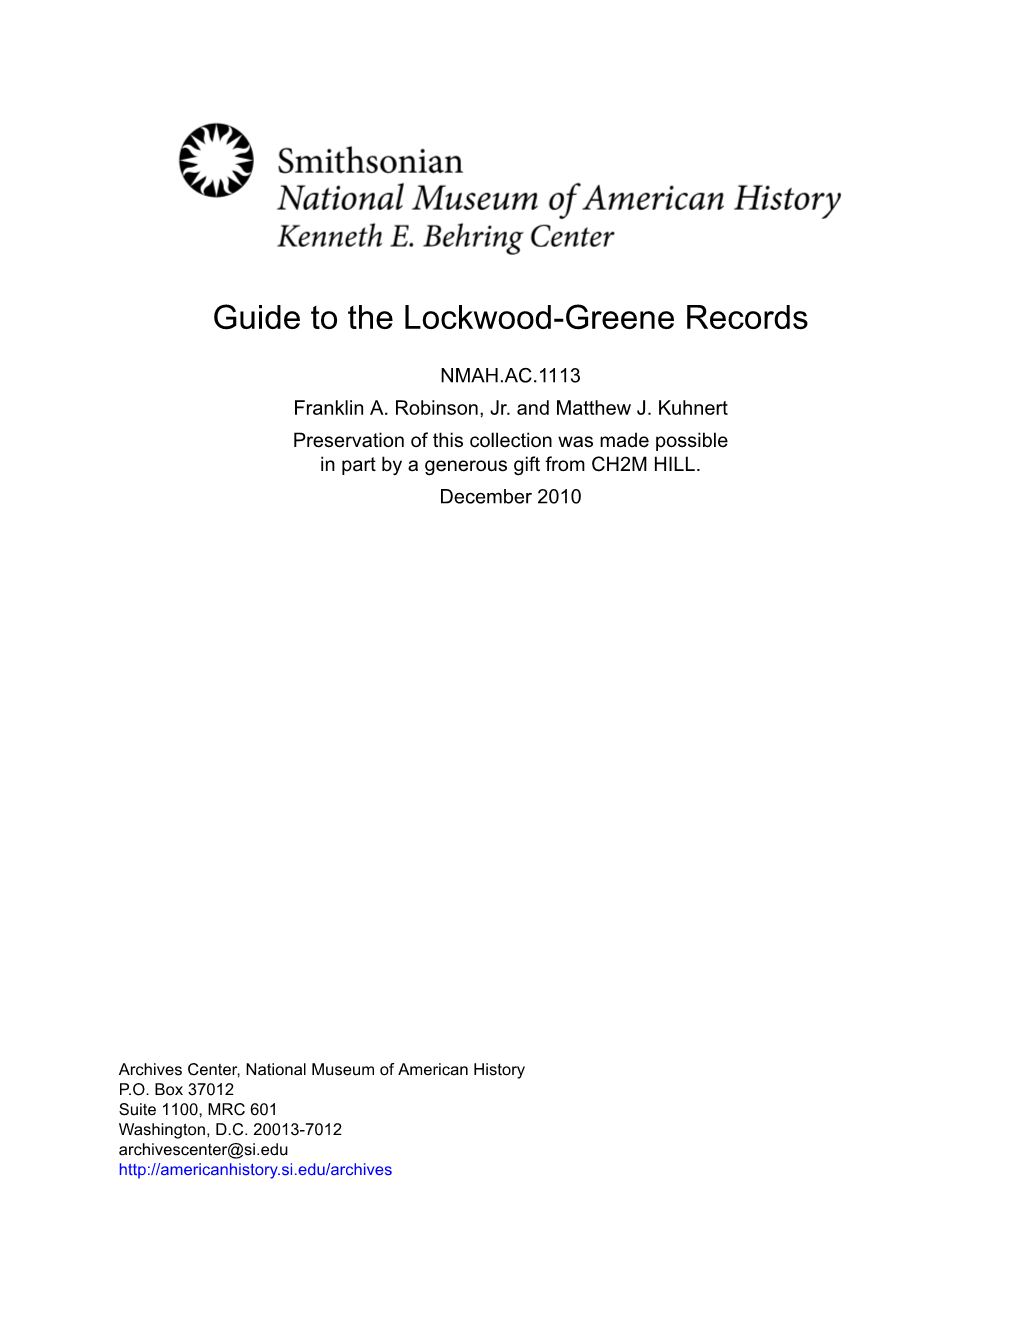 Guide to the Lockwood-Greene Records